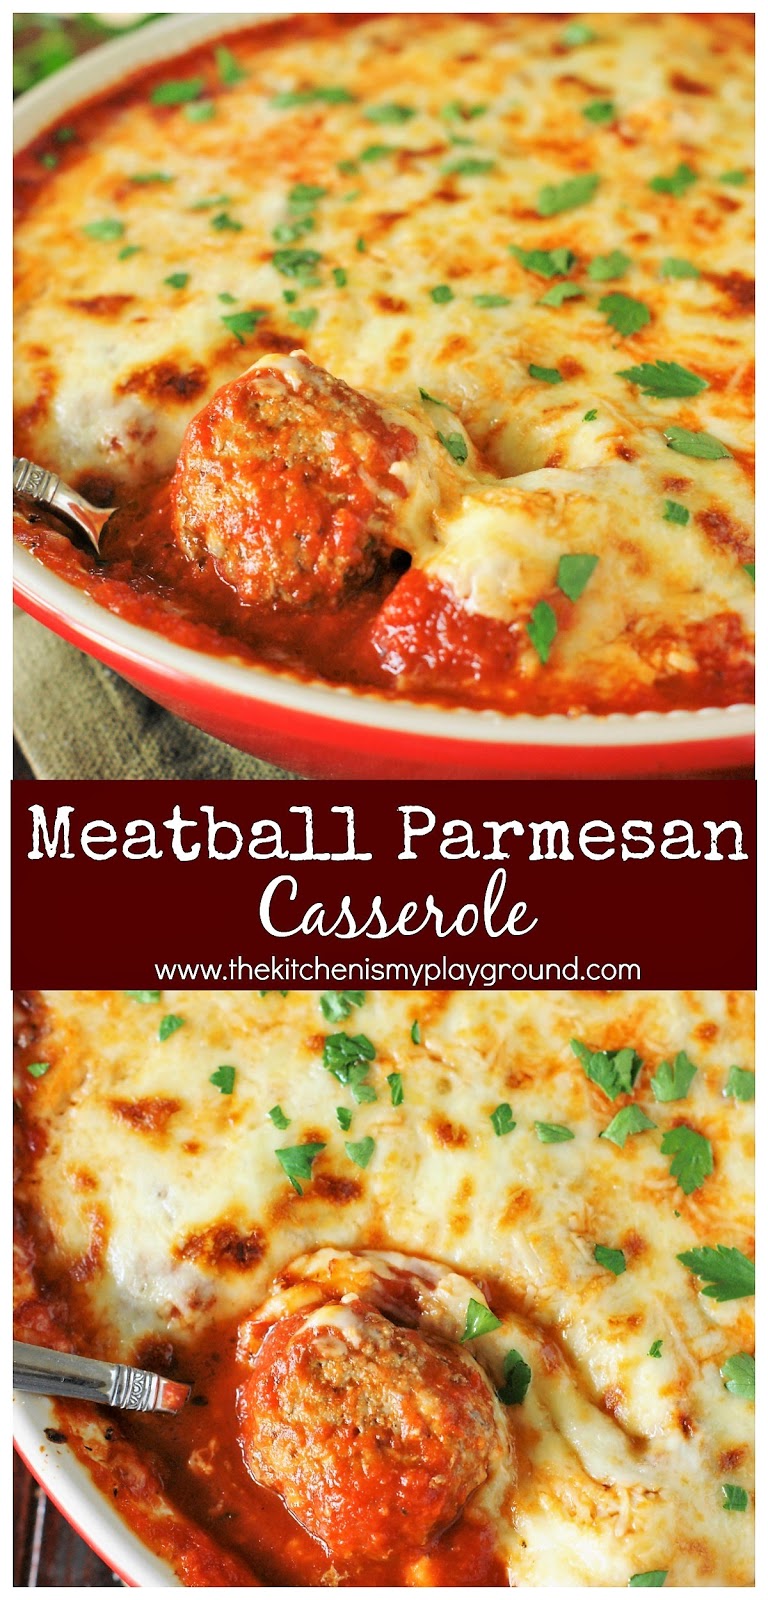 Easy Meatball Parmesan Casserole | The Kitchen is My Playground